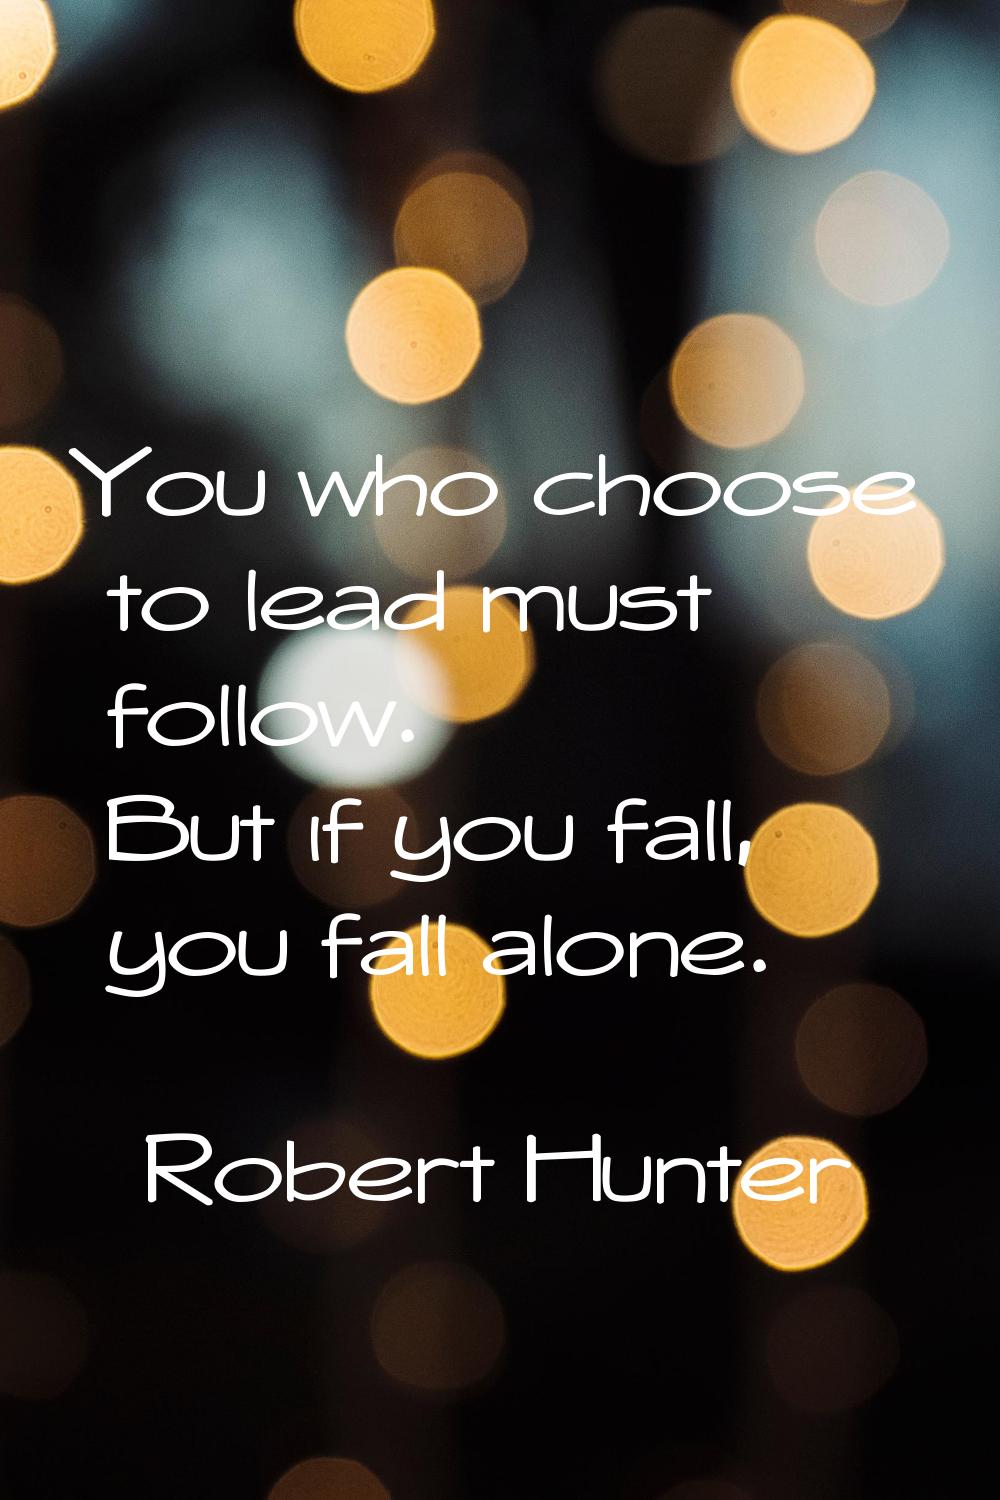 You who choose to lead must follow. But if you fall, you fall alone.